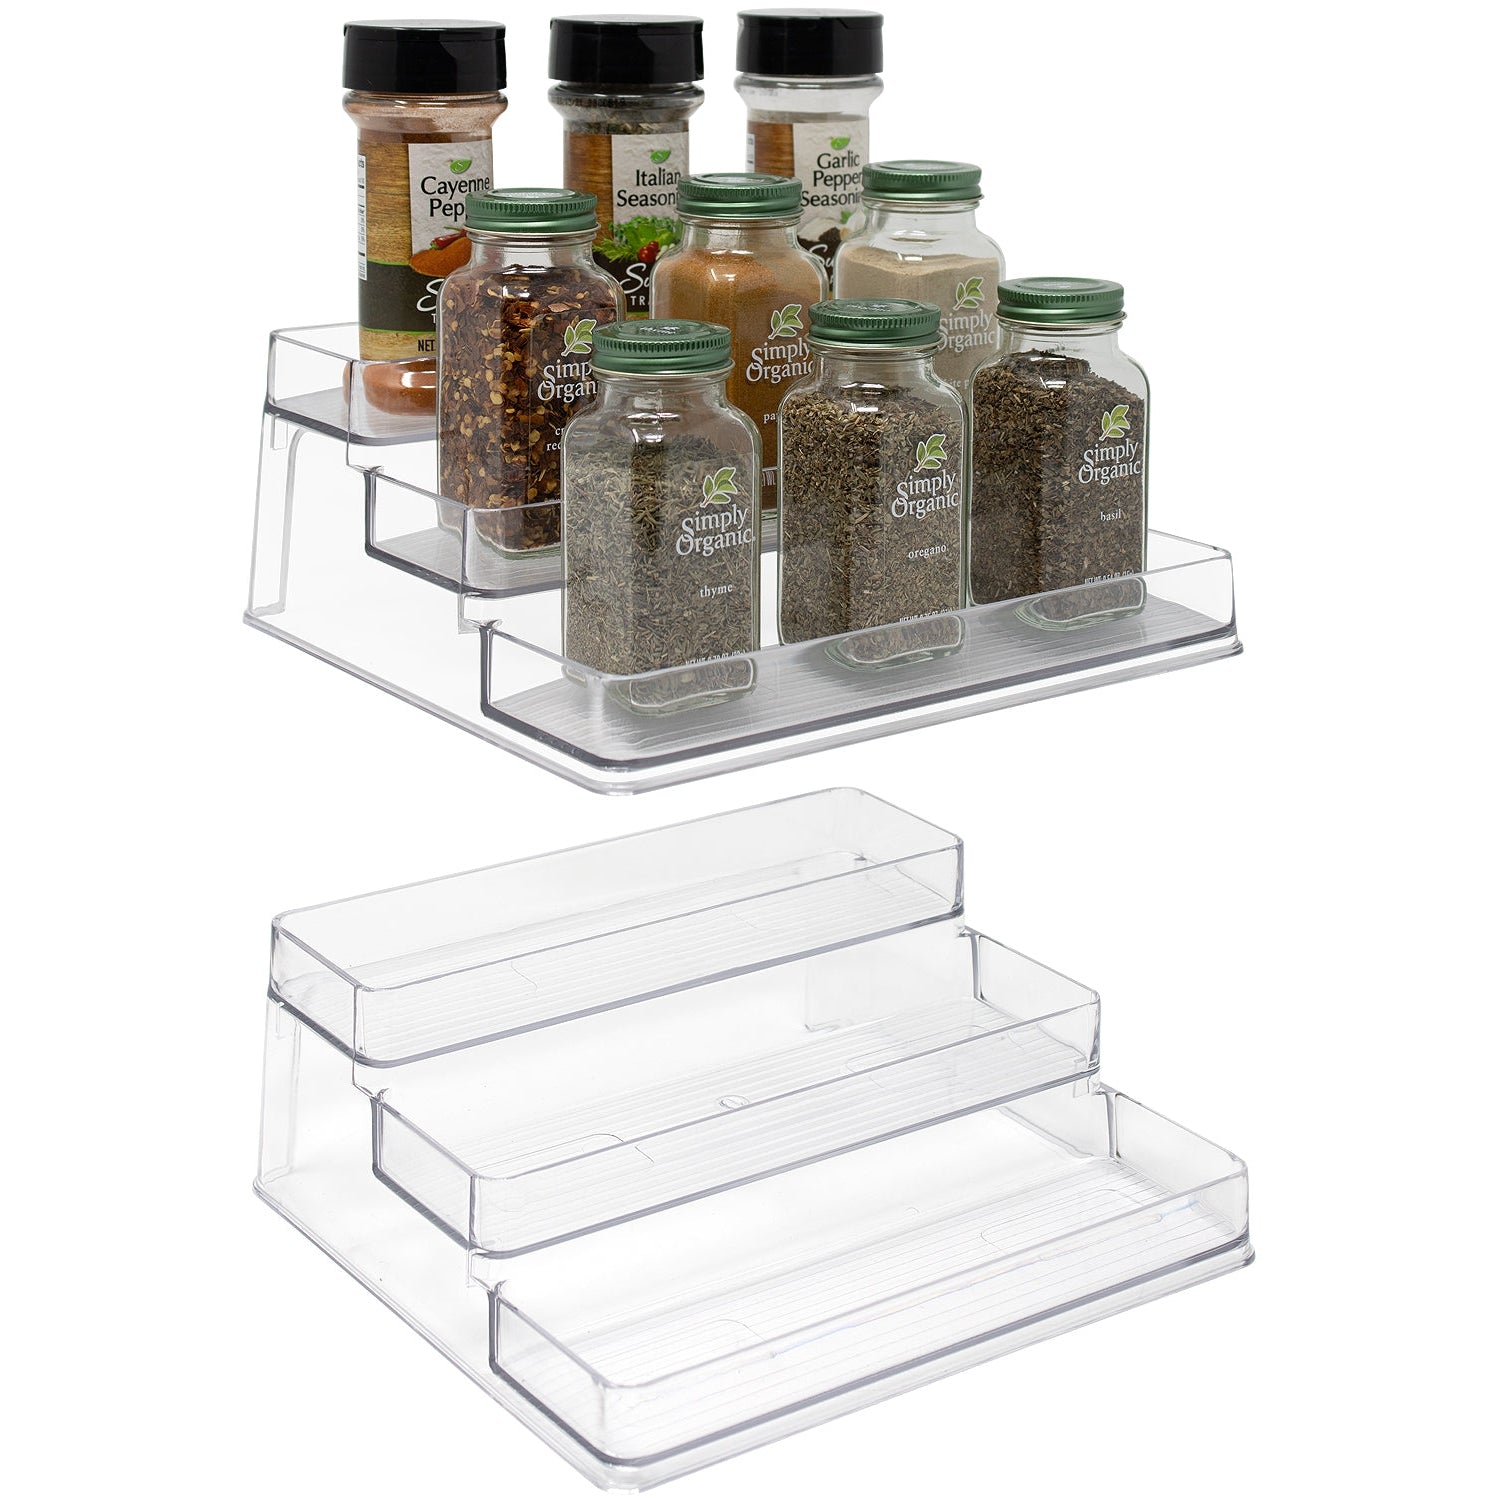 mDesign Plastic Kitchen Tiered Food Storage Shelves, 2 Levels, 4 Pack Clear